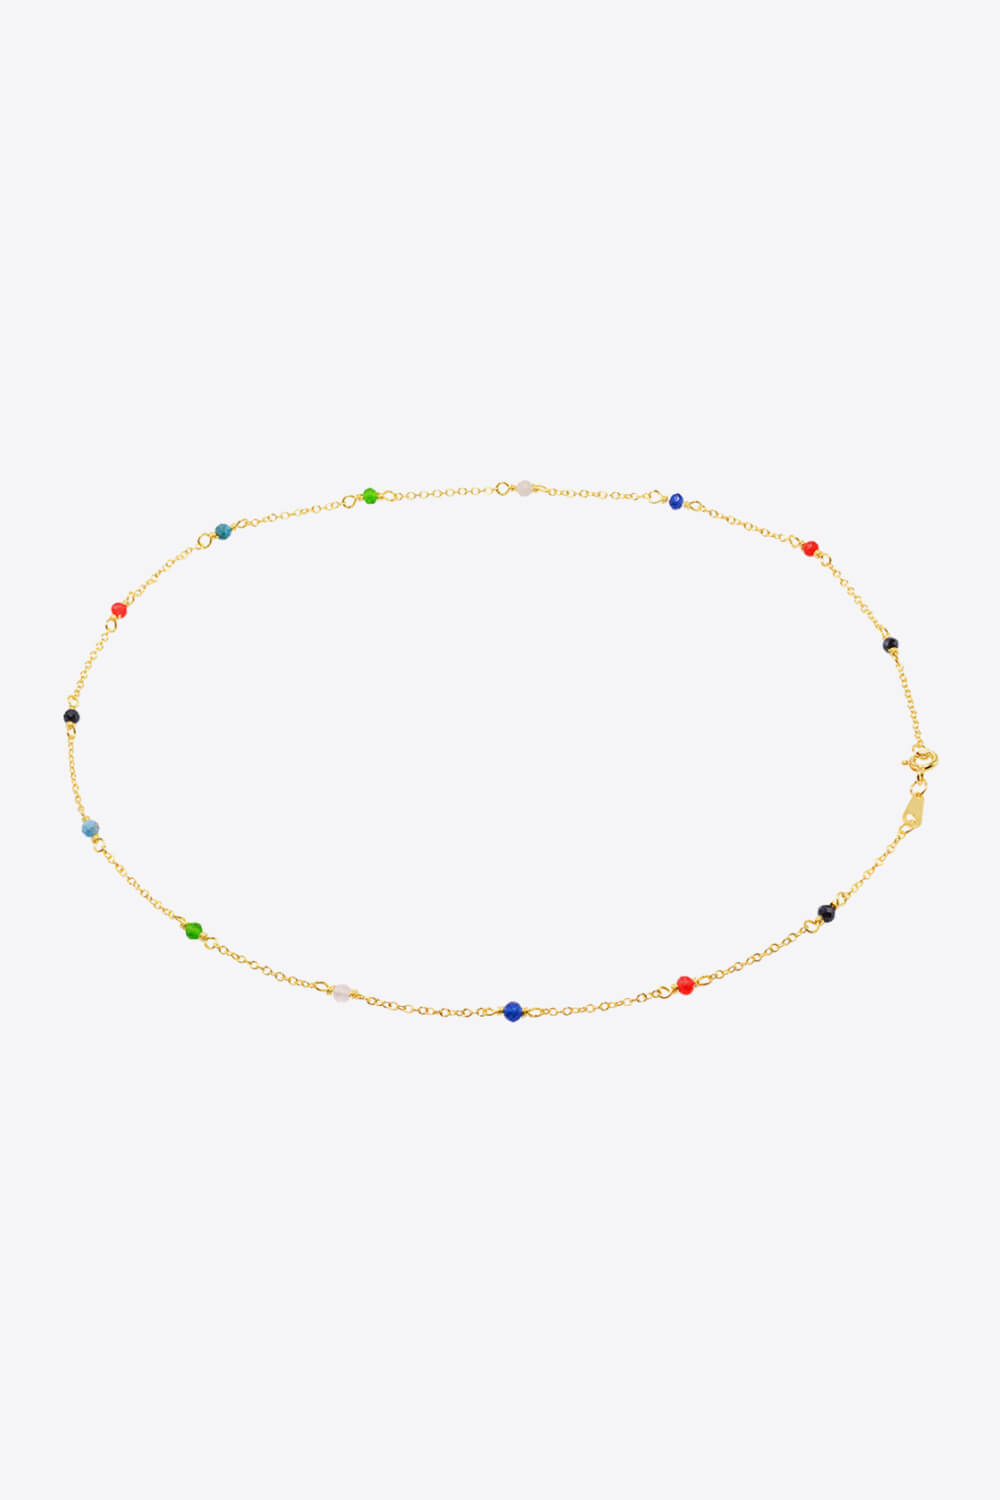 18K Gold-Plated Multicolored Bead Necklace - Necklaces - FITGGINS